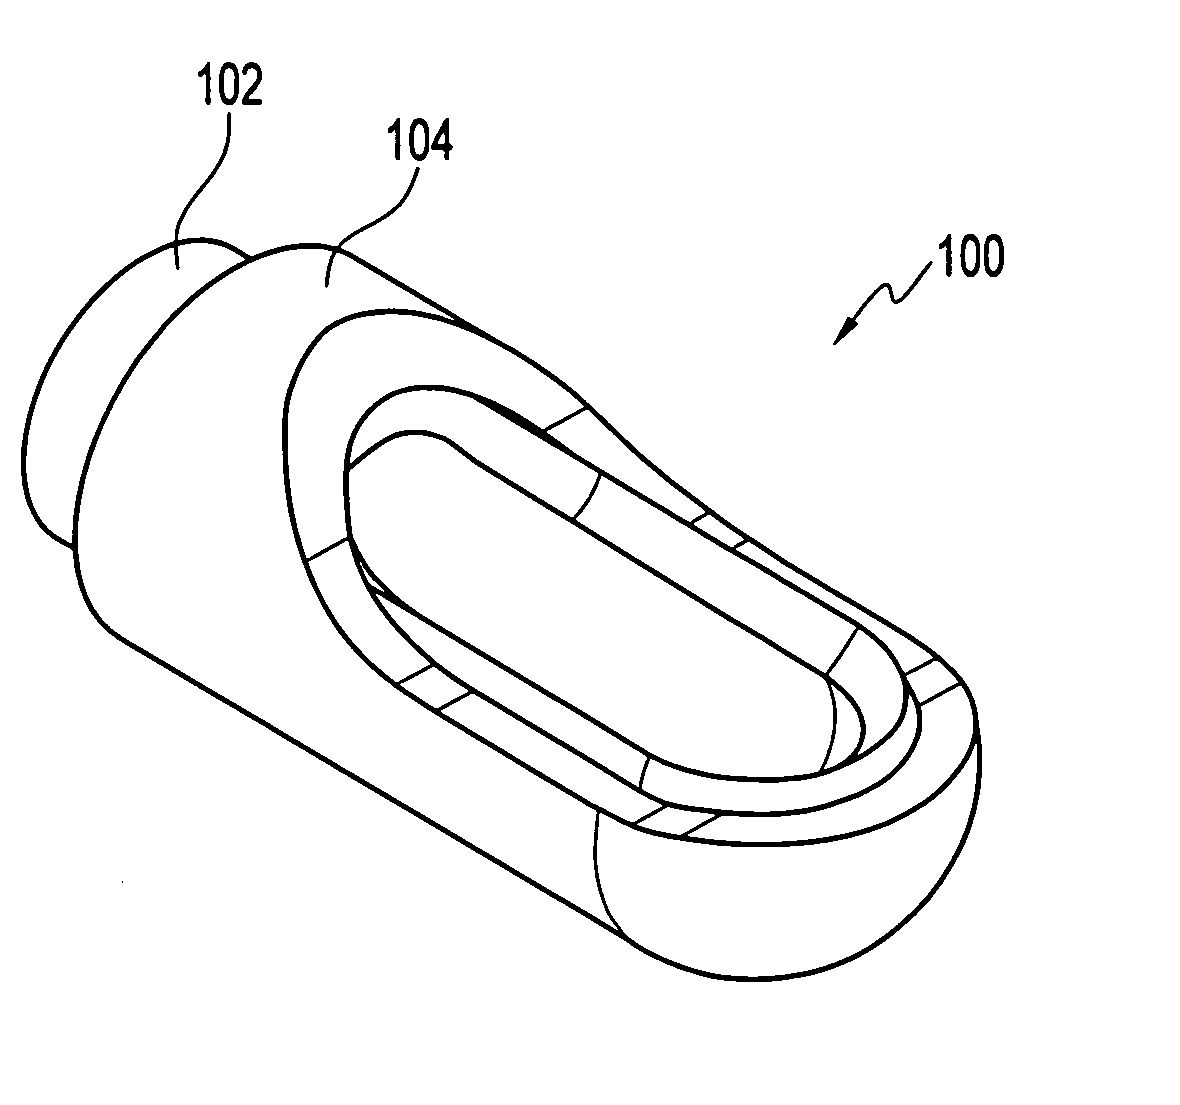 Arthroscopic shaver and method of manufacturing same